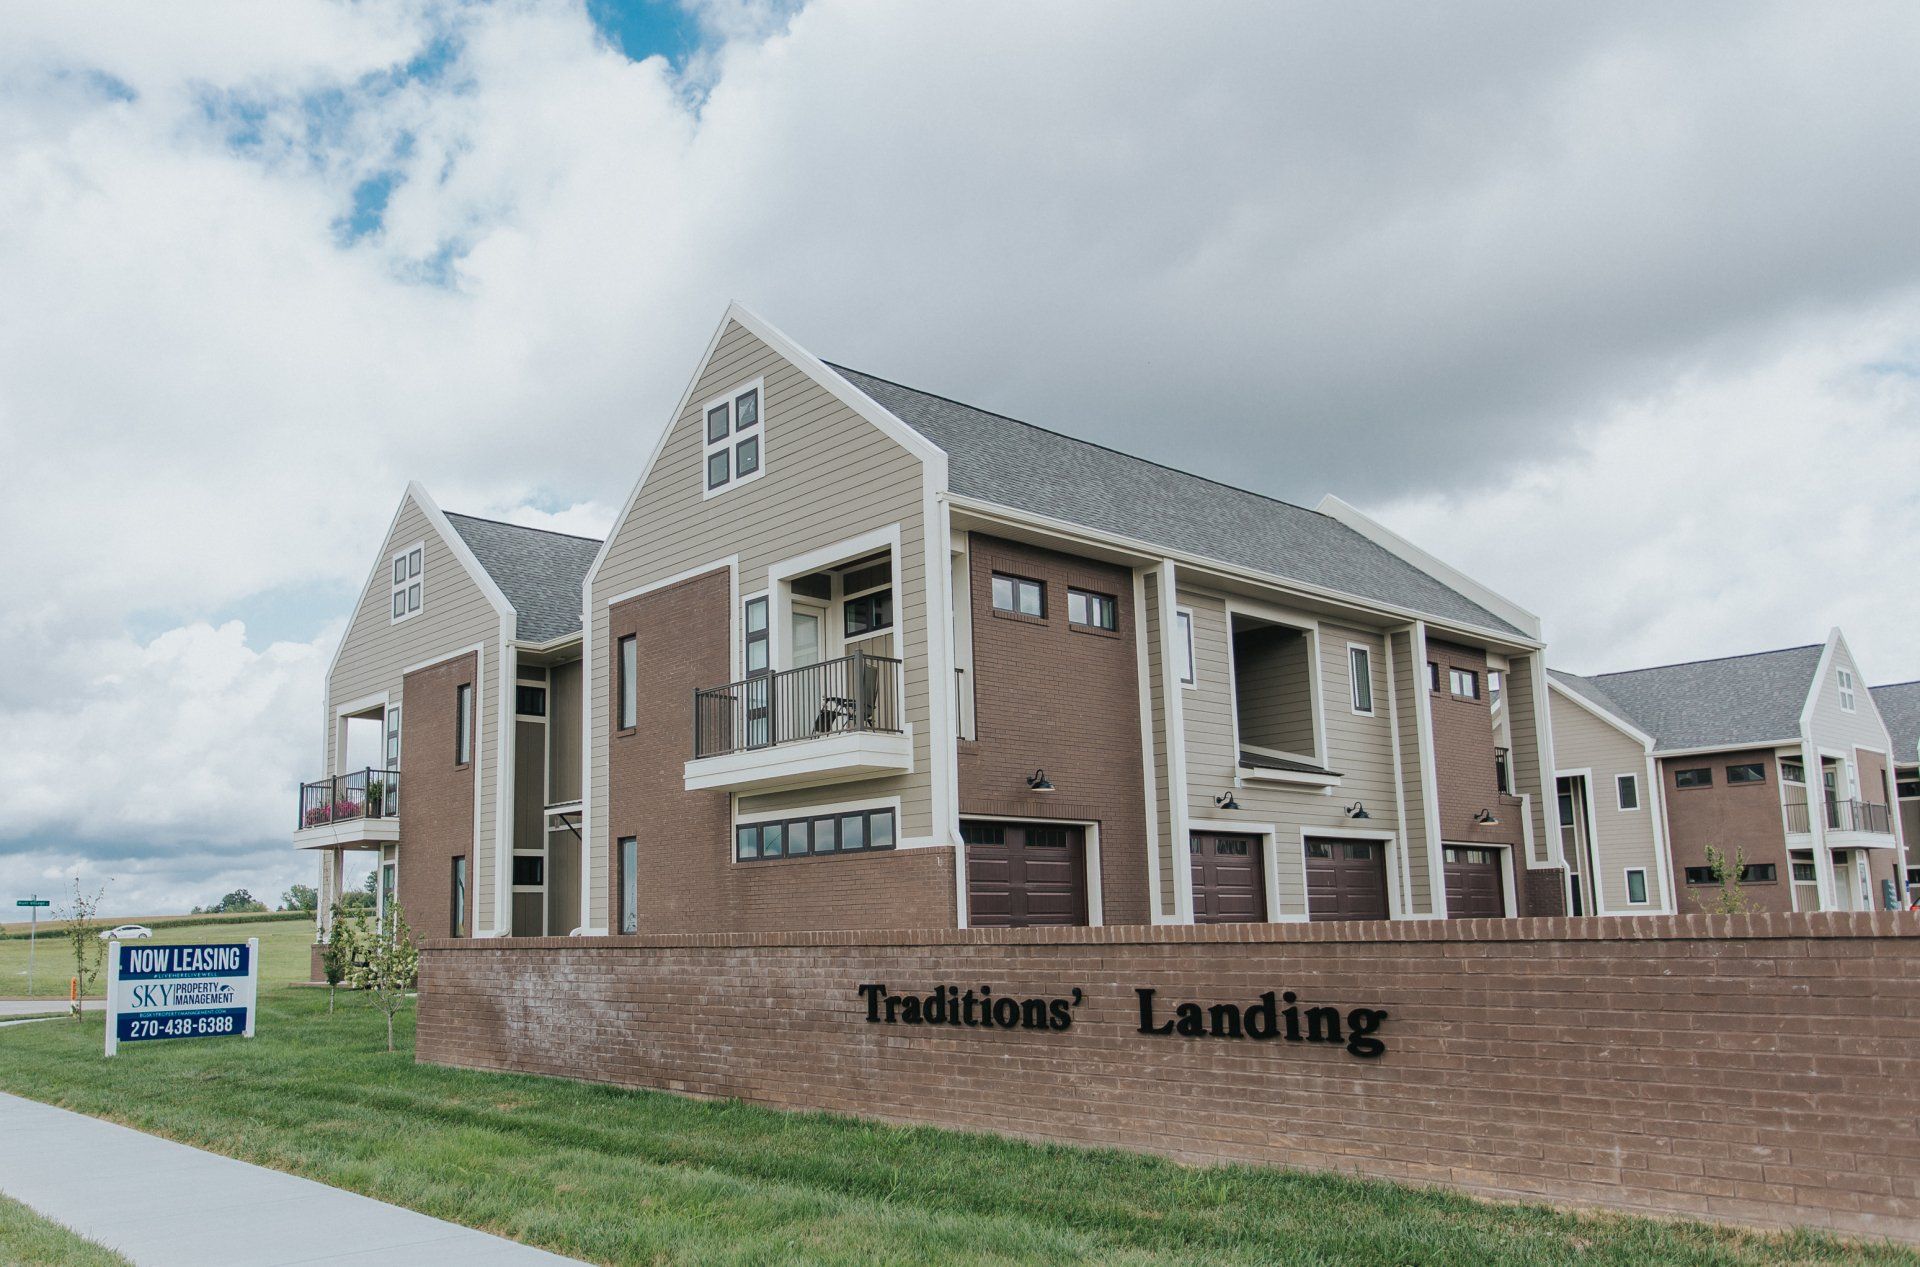 Picture of buildings at Traditions' Landing